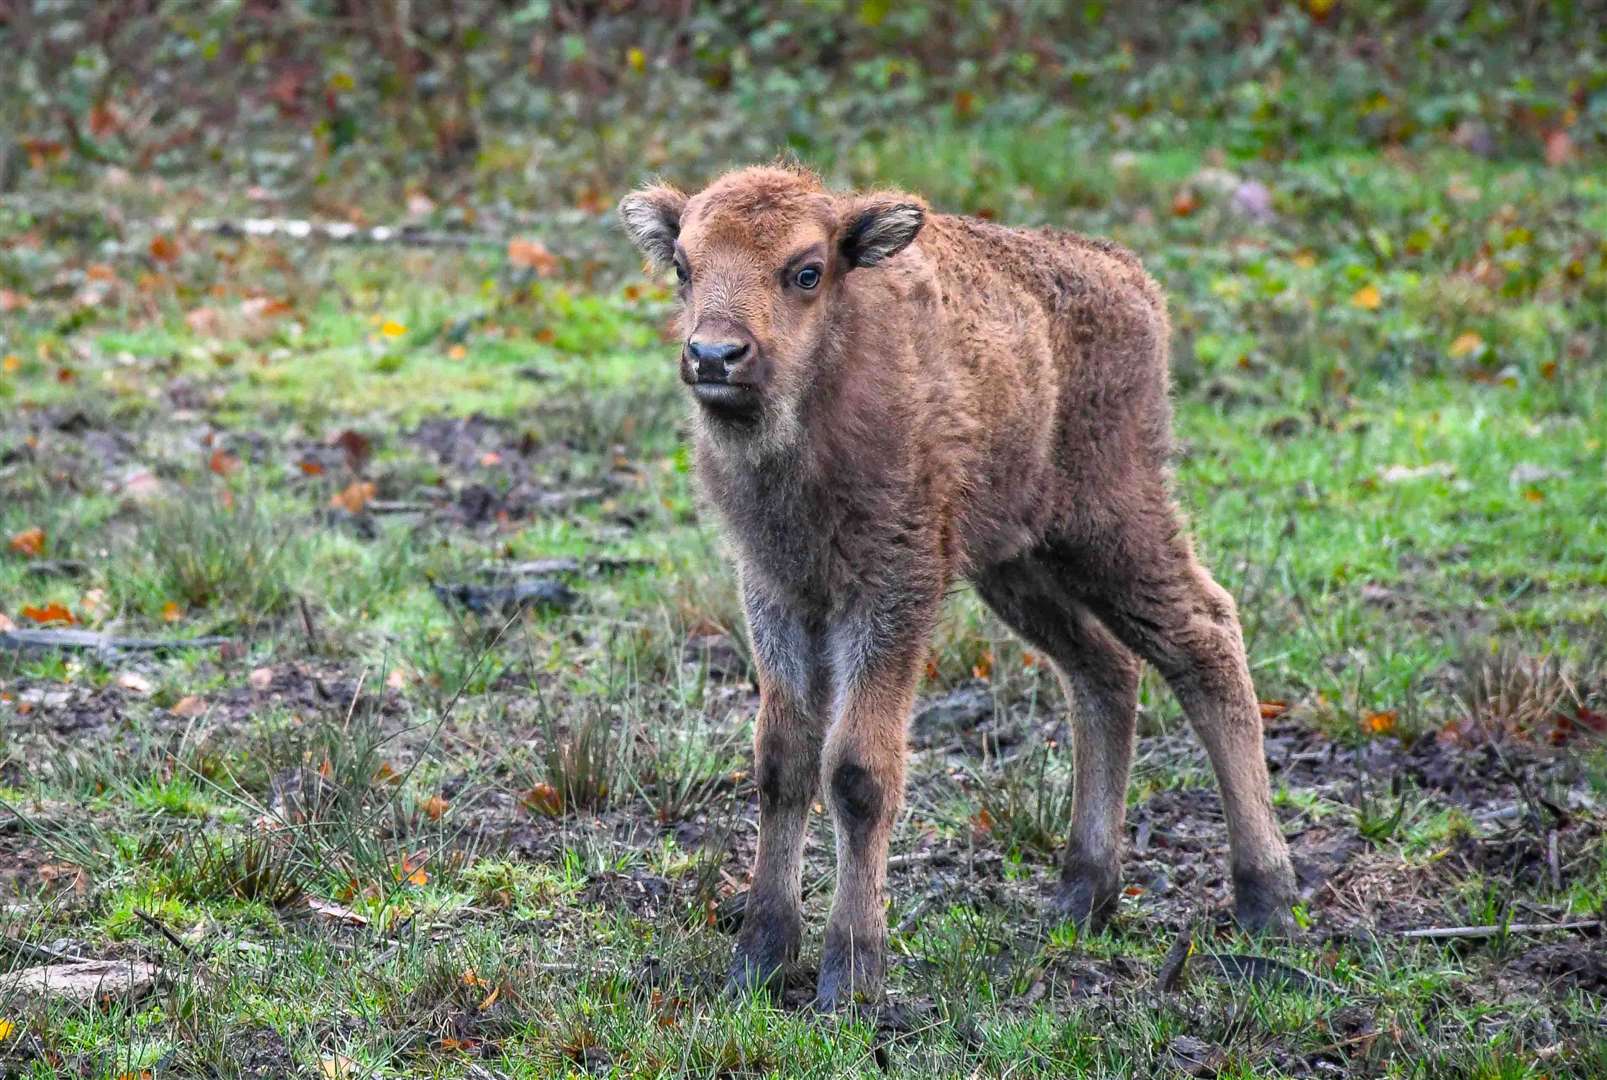 The new bison calf at West Blean and Thornden Woods near Canterbury. Picture: Tim Horton for Kent Wildlife Trust